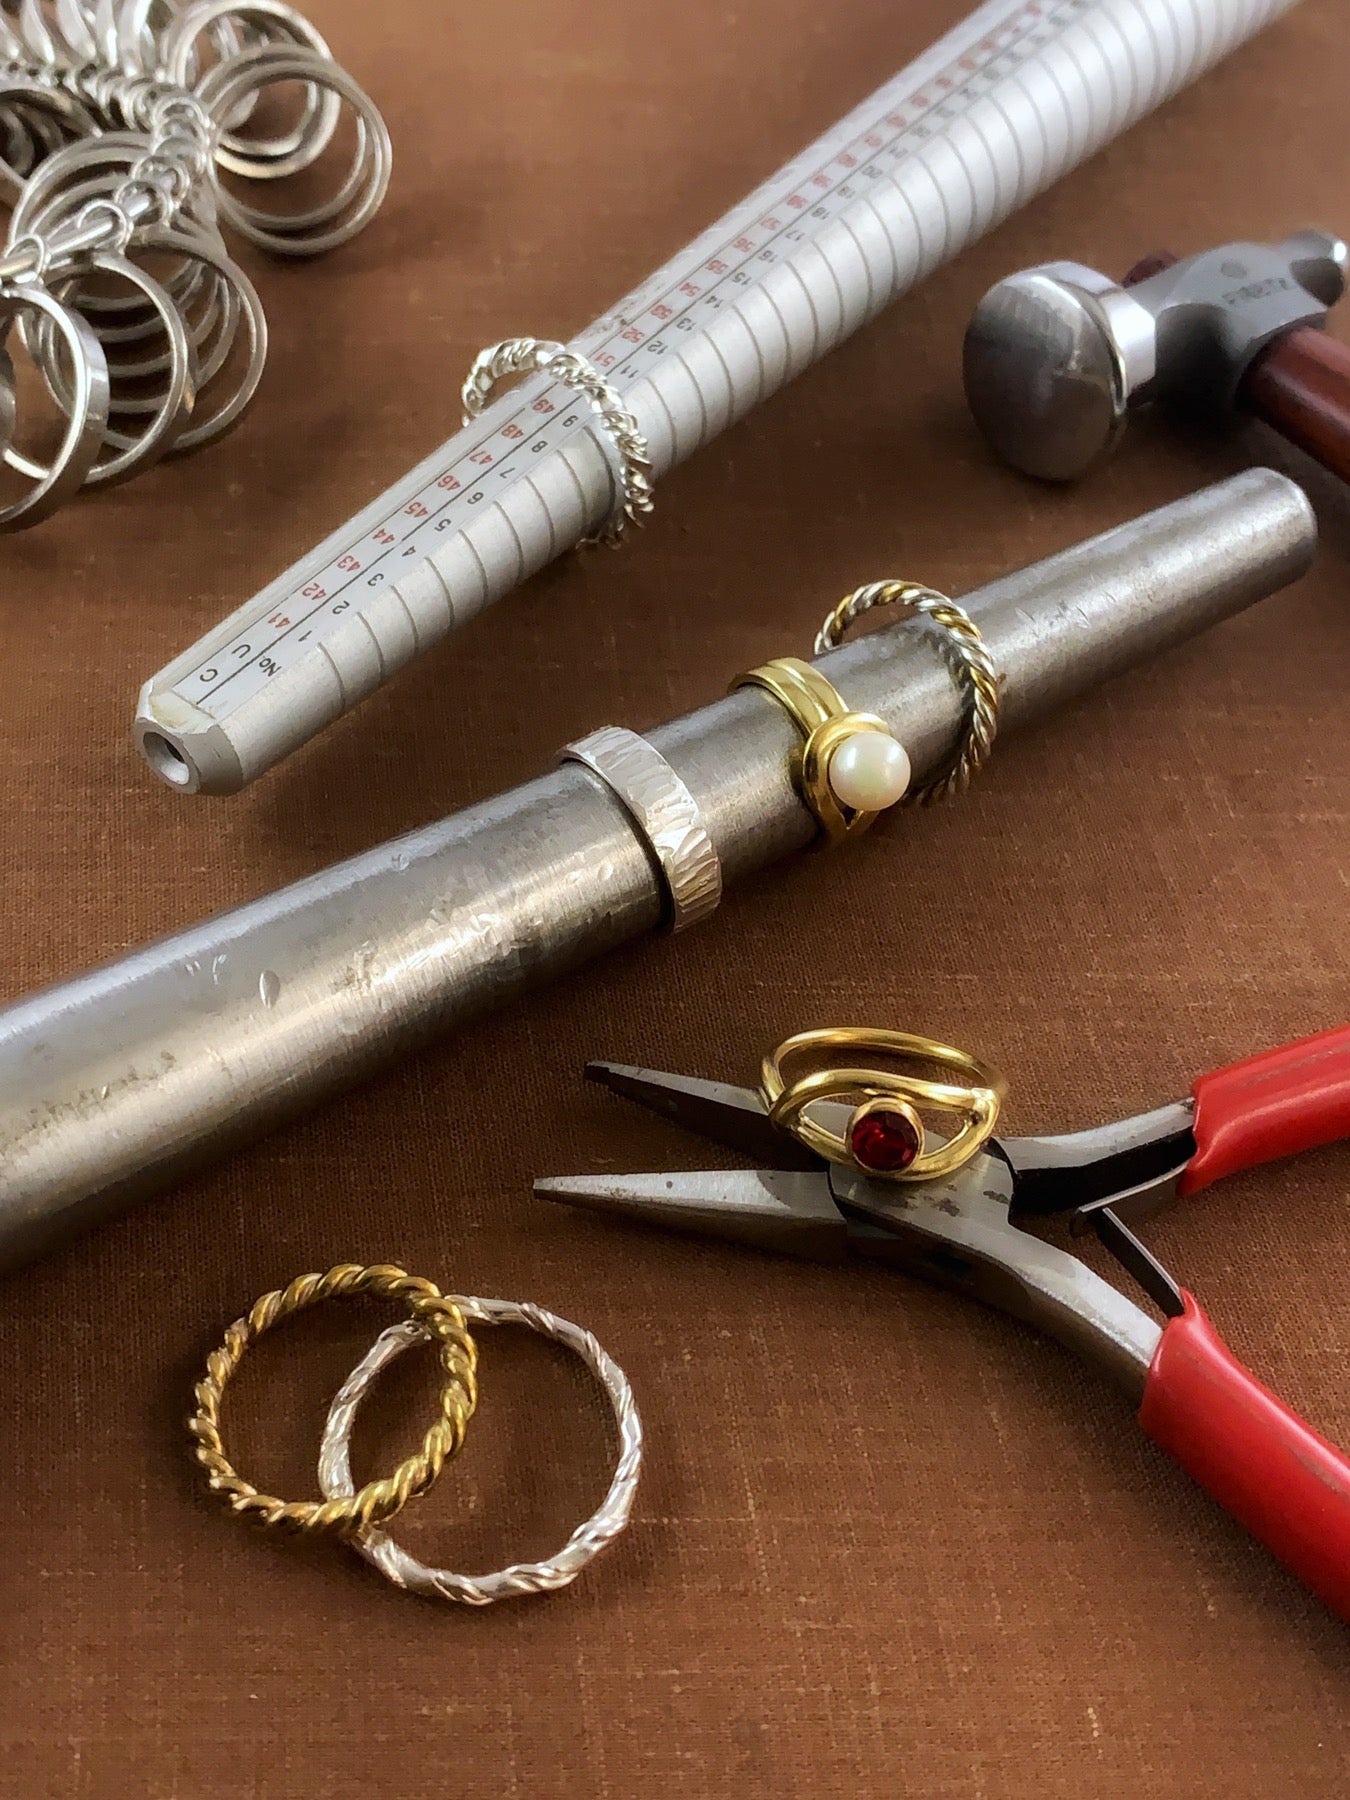 Jewelry Making Tools You ABSOLUTELY NEED To Start Metalsmithing